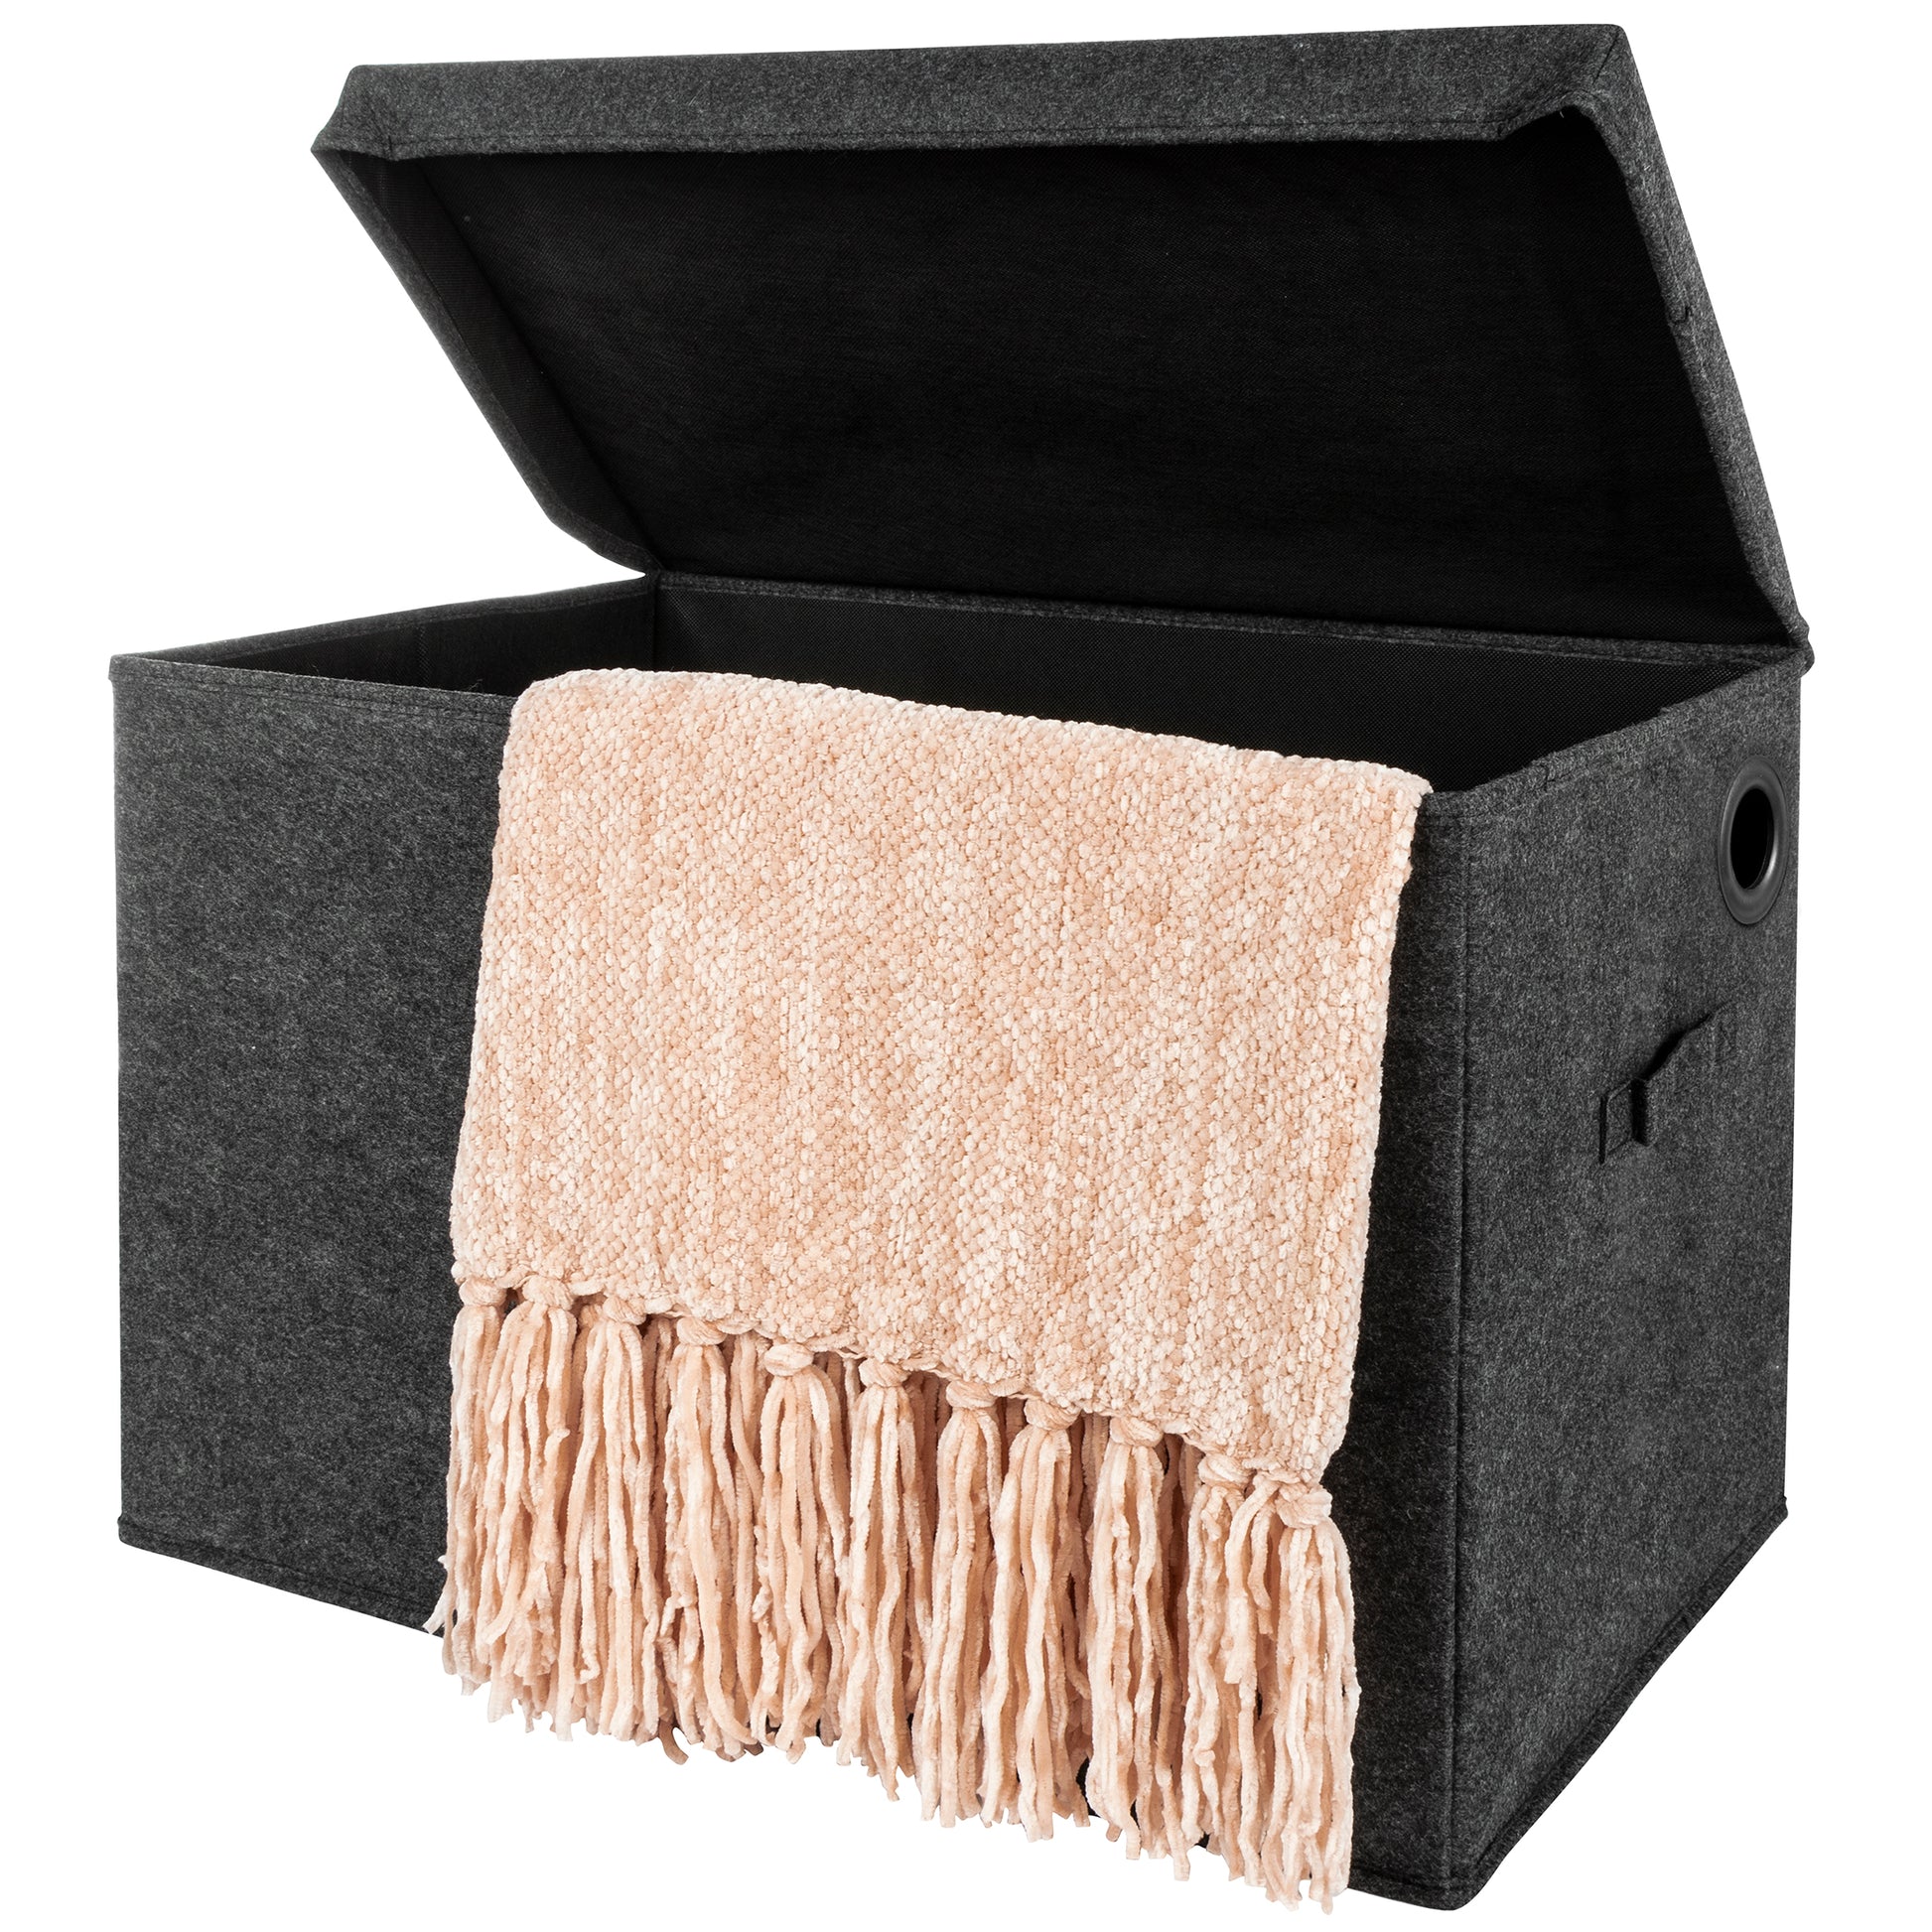 Charcoal Gray Felt Toy Box by Sammy & Lou® Angled with lid open with pink blanket peeking out